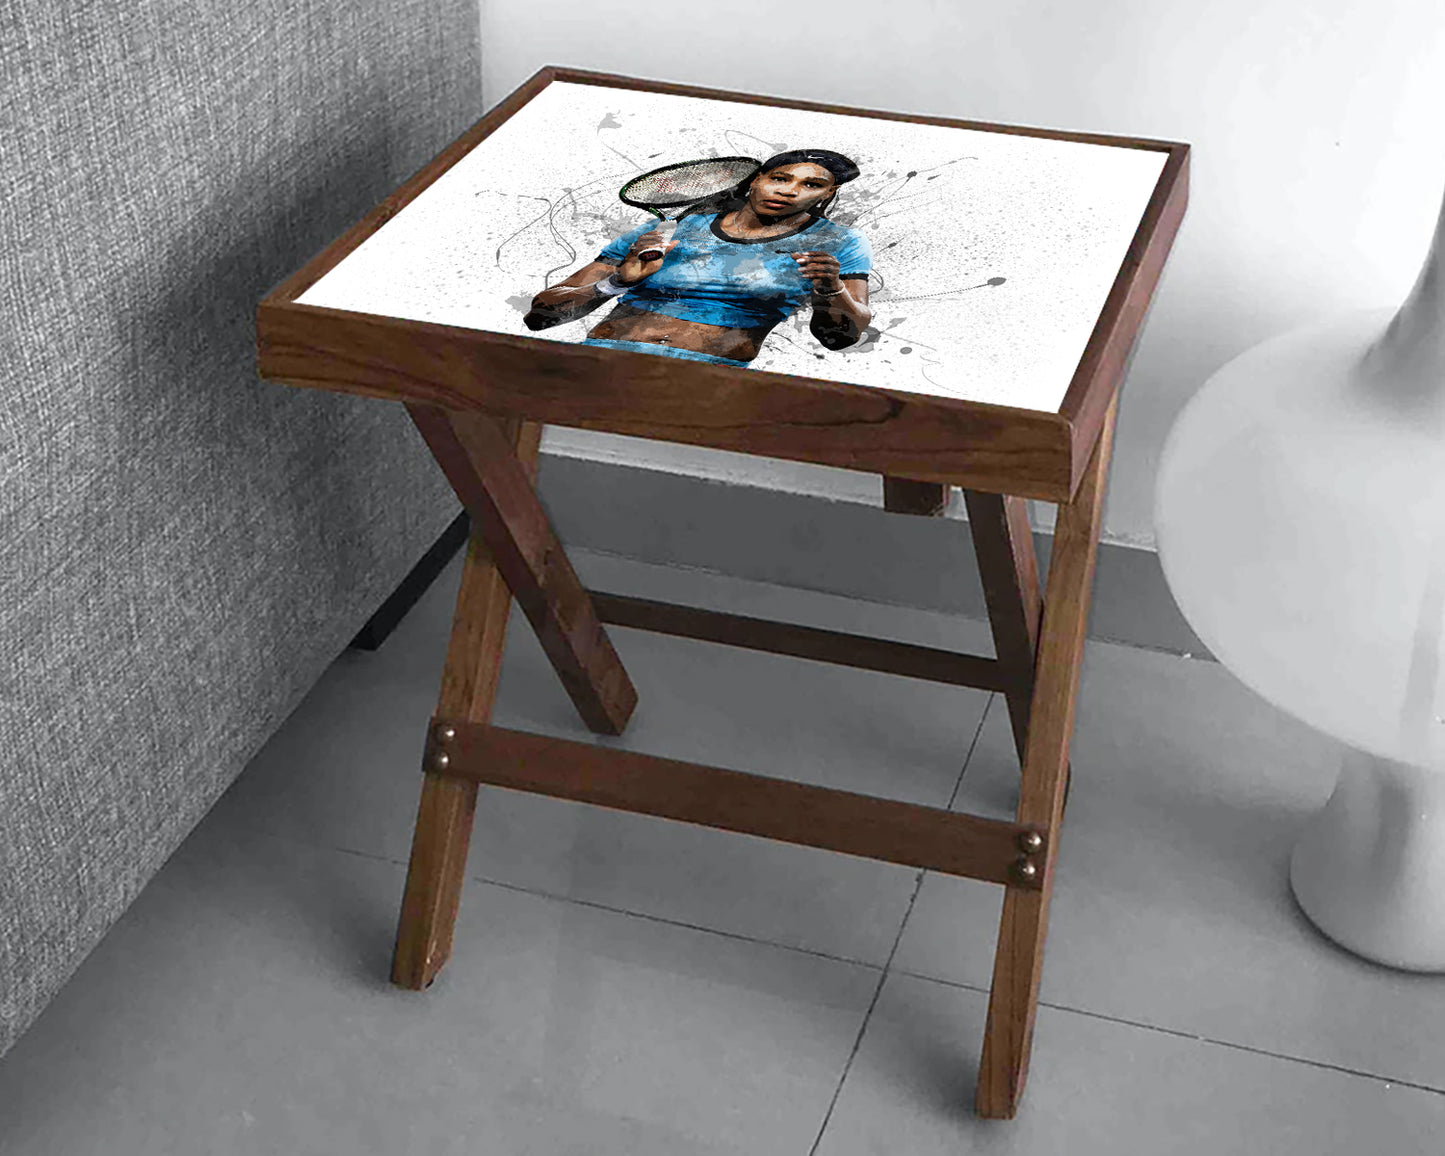 Serena Williams Splash Effect Coffee and Laptop Table 